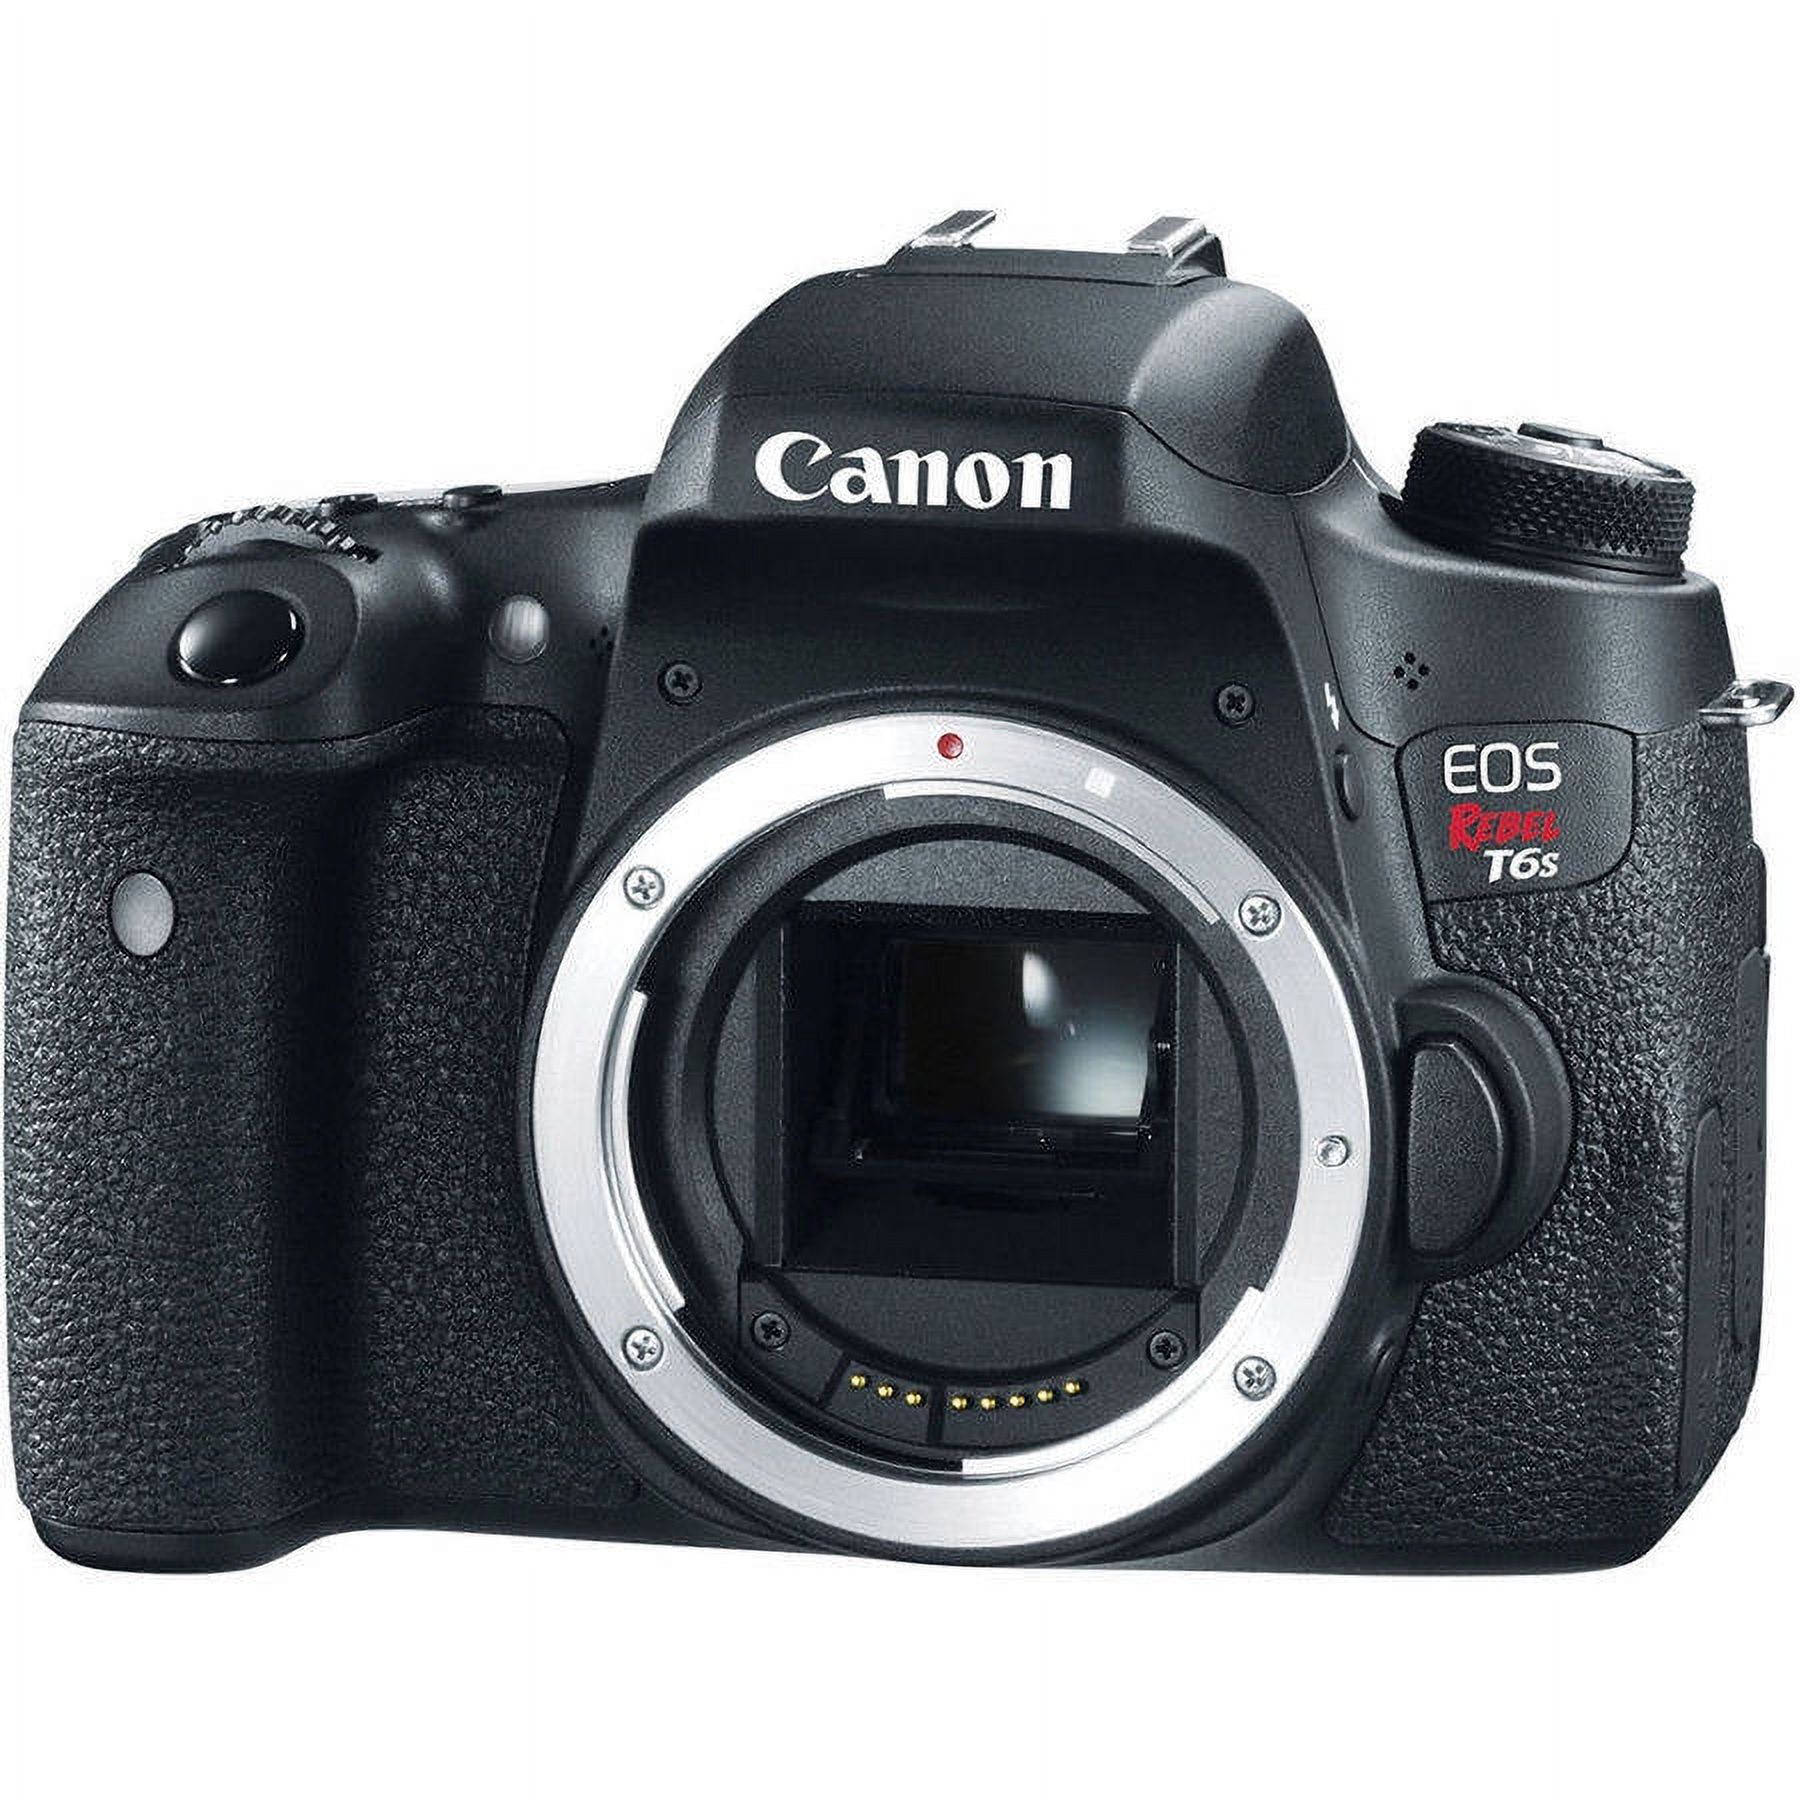 Canon Black EOS Rebel T6s Digital SLR Camera with 24.2 Megapixels (Body Only) - image 1 of 3